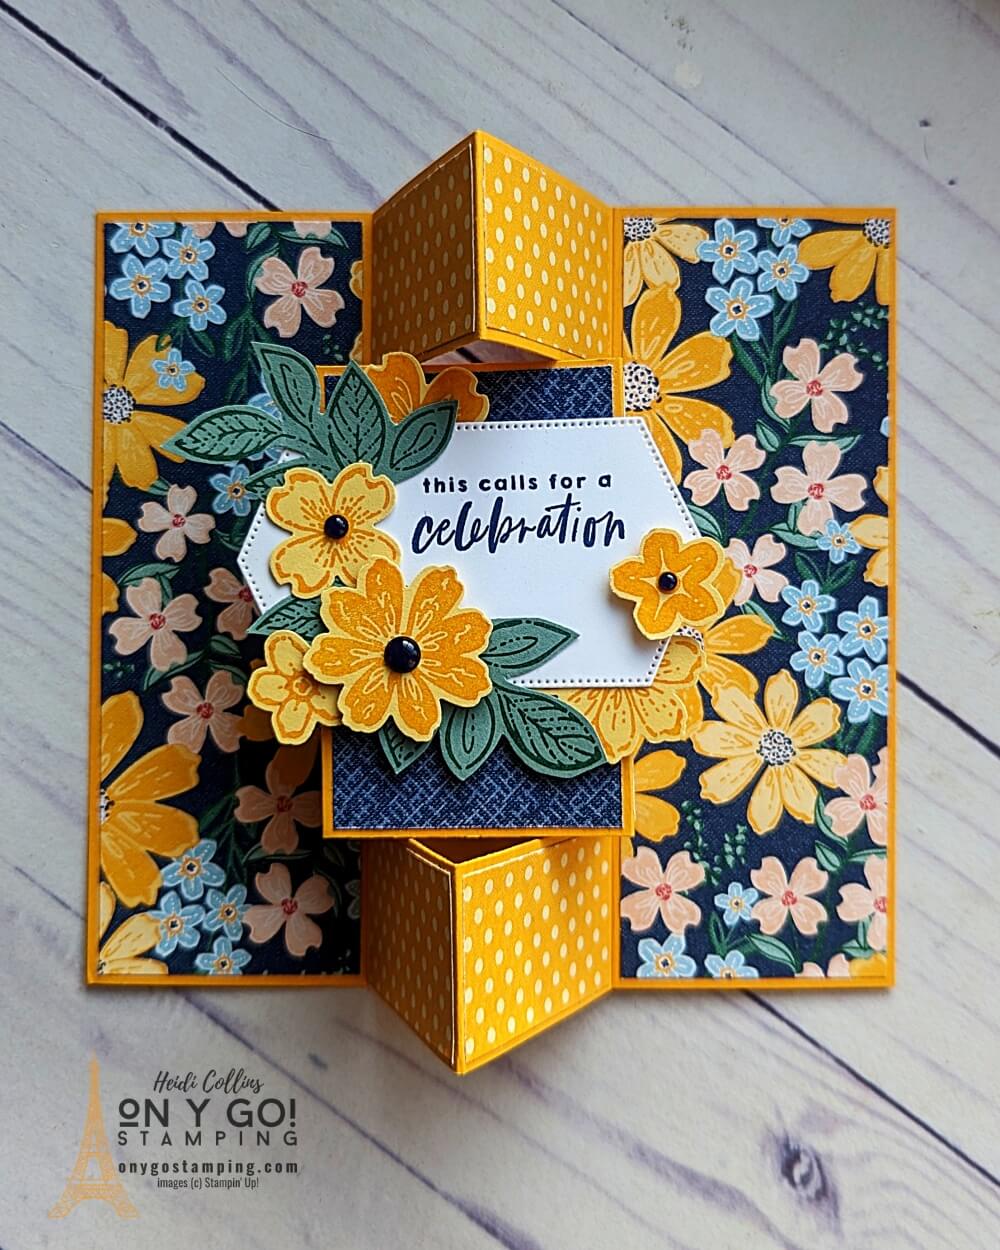 Pop Out Gate Fold Card: Check out the Petal Park stamp set from Stampin' Up!® This fun fold card  features the Petal Park stamp set and Regency Park designer series paper (DSP). With beautiful images and vibrant colors, this card is sure to bring some extra joy to its recipient. Whether you make it for a beloved friend or a special occasion, it is sure to be a hit!